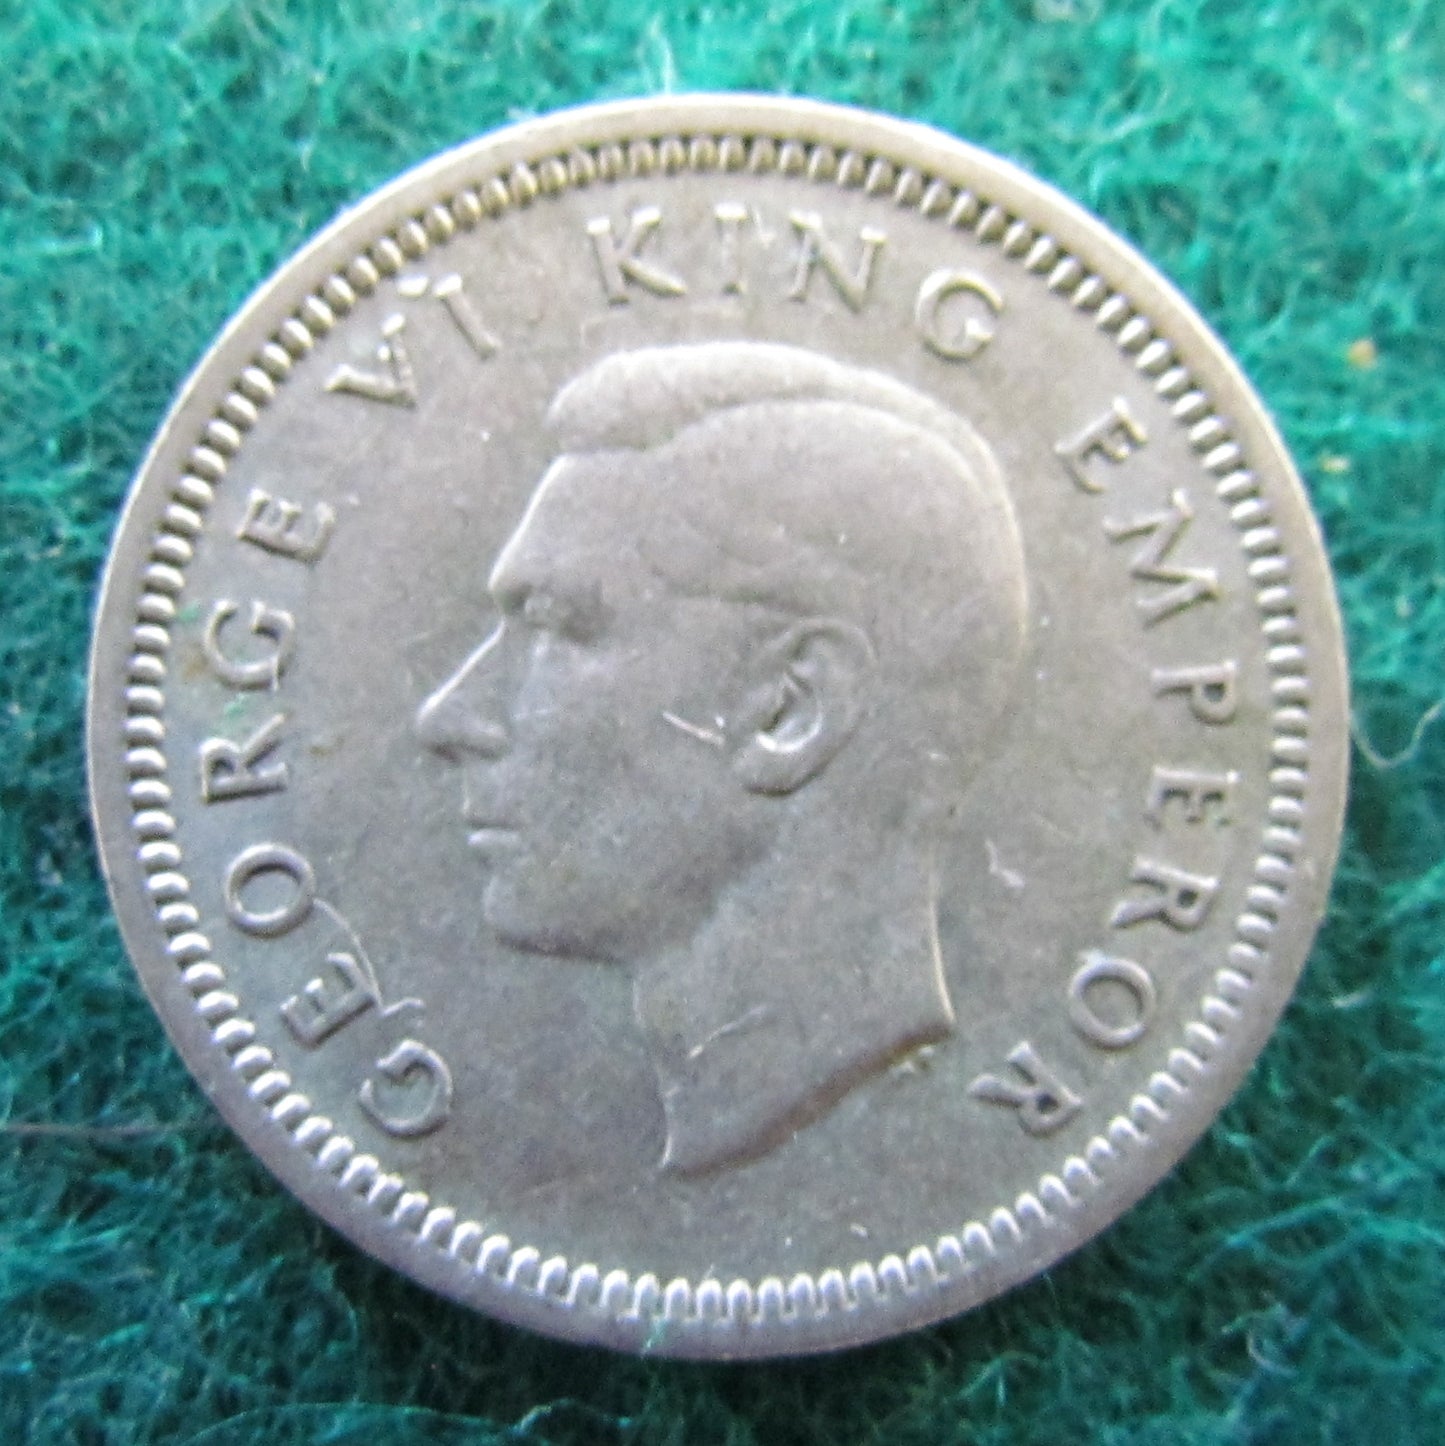 New Zealand 1945 Threepence King George VI Coin